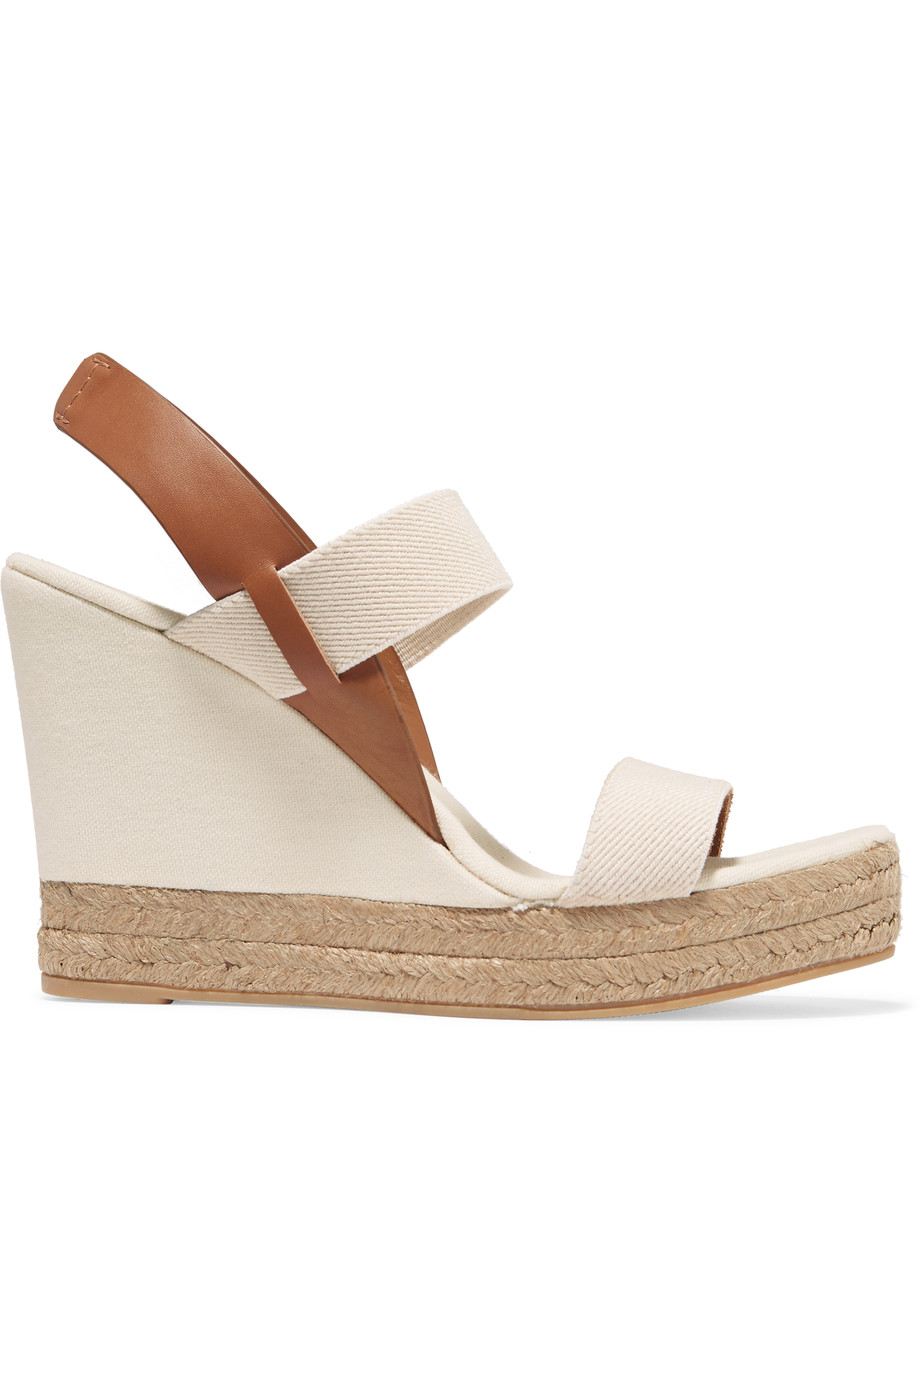 Tory Burch Canvas And Leather Wedge Sandals | ModeSens